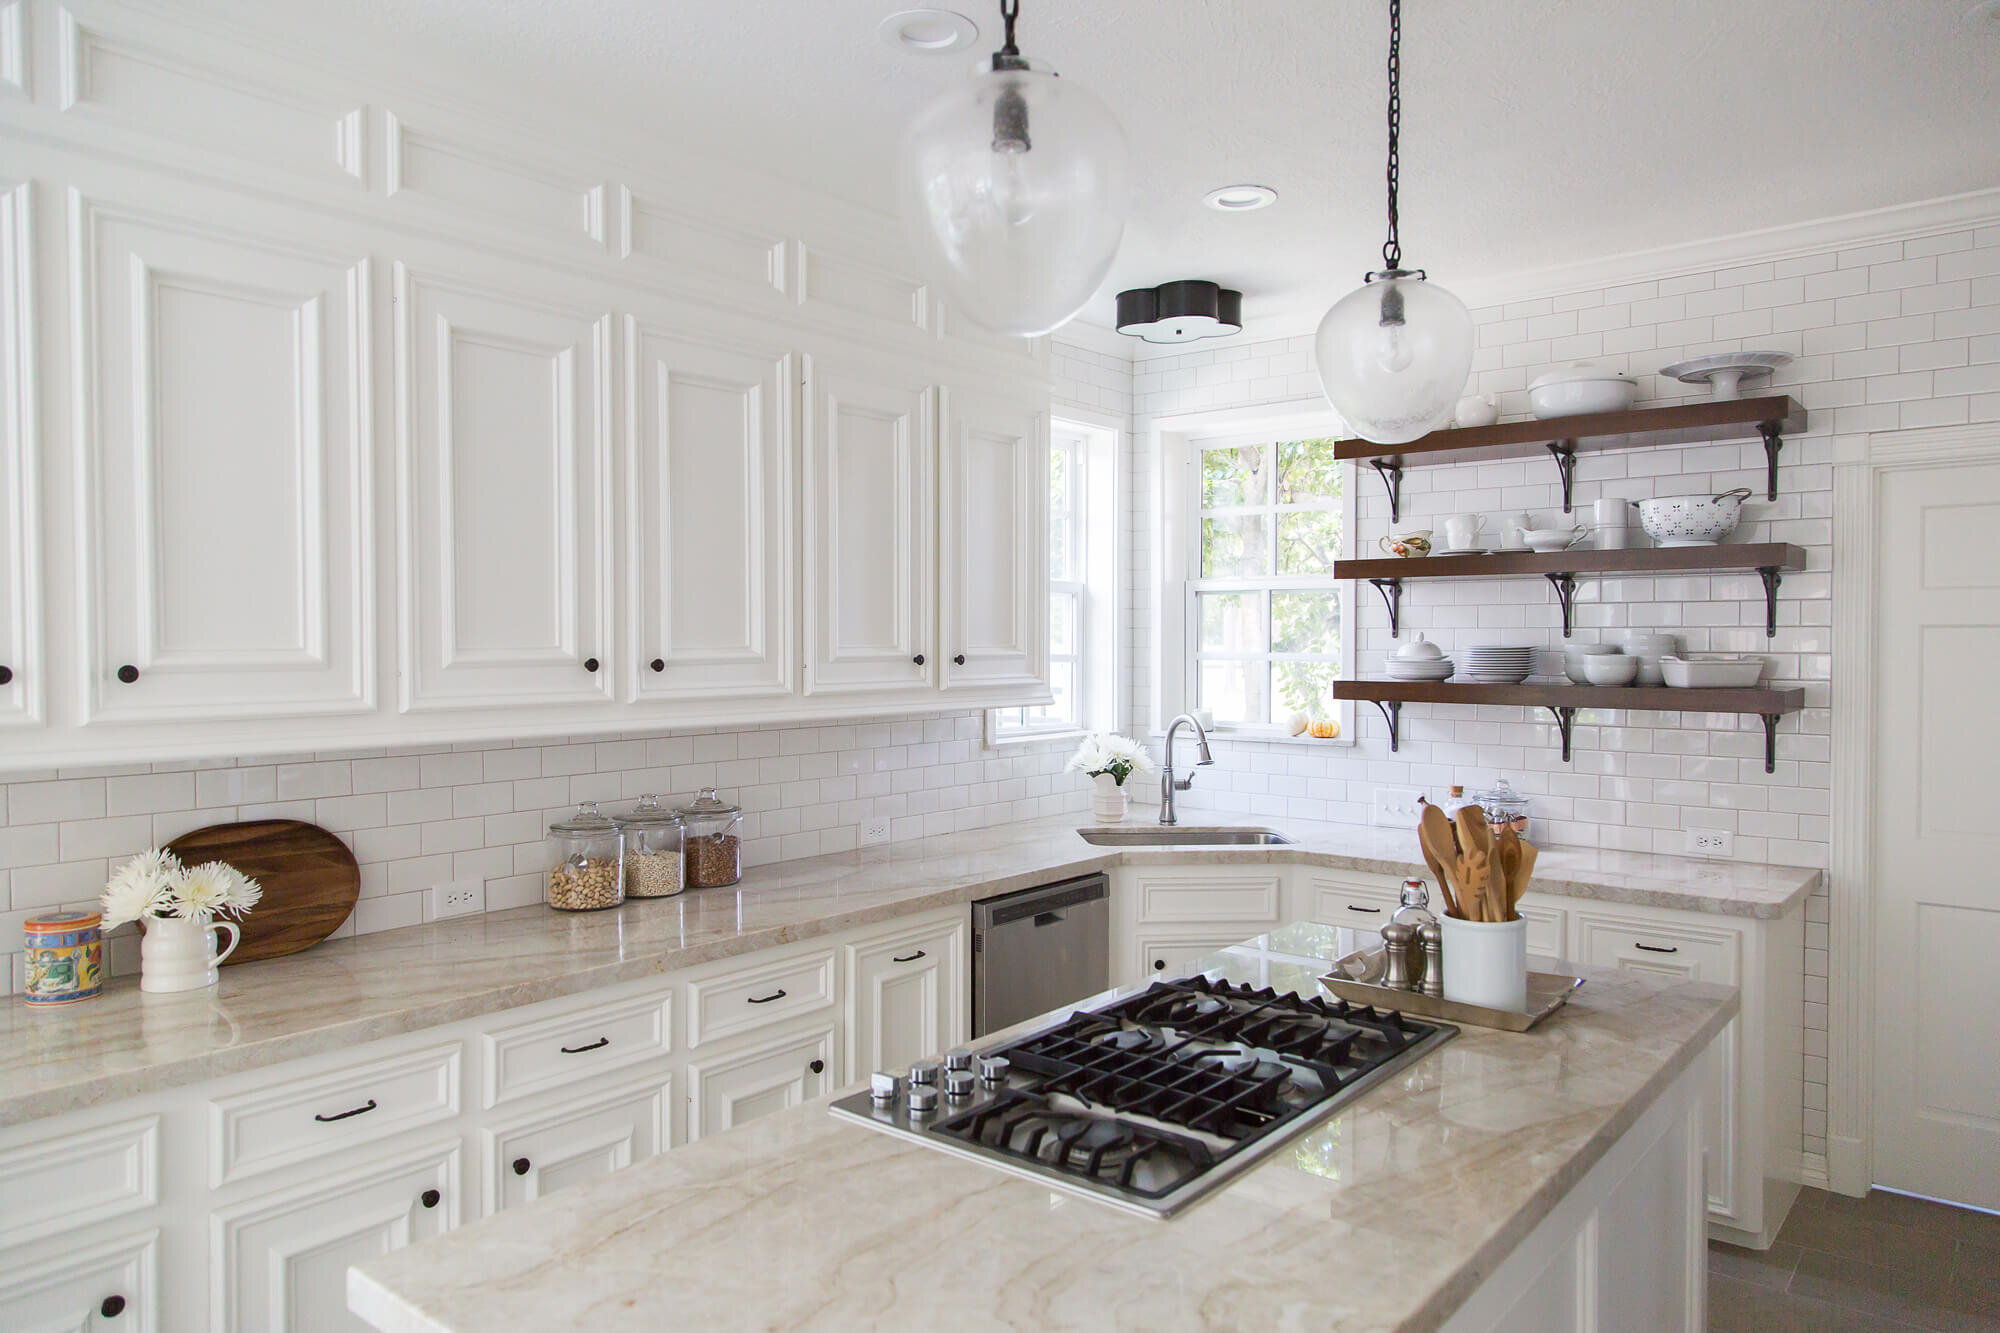 Cabinet Pulls And Knobs, White Kitchen Cabinets Pulls